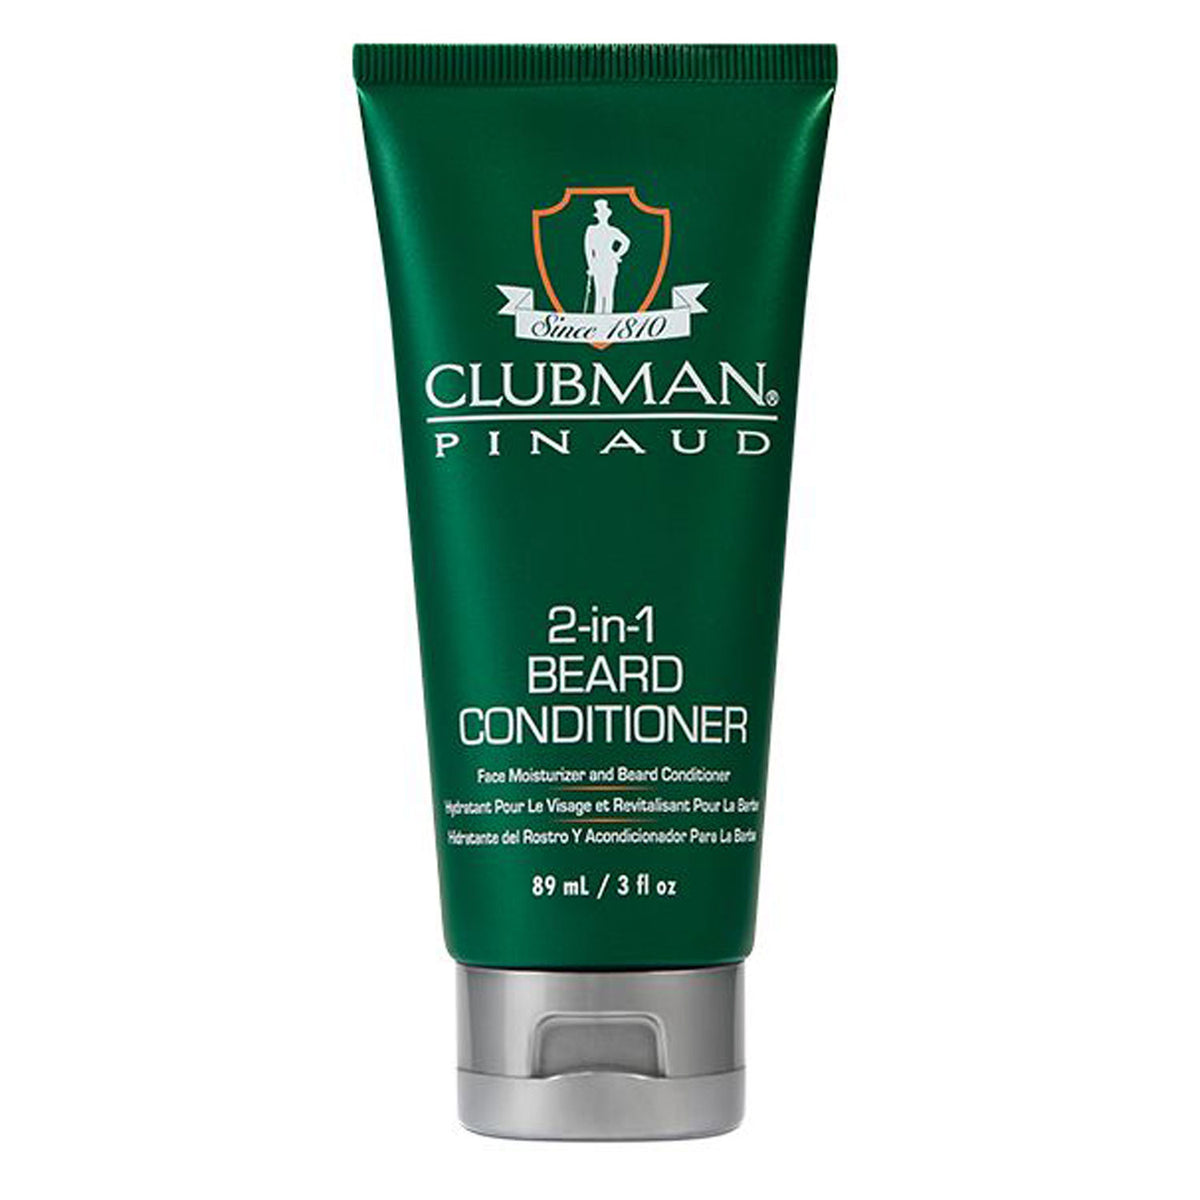 Clubman 2-in-1 Beard Conditioner 89ml - Orcadia